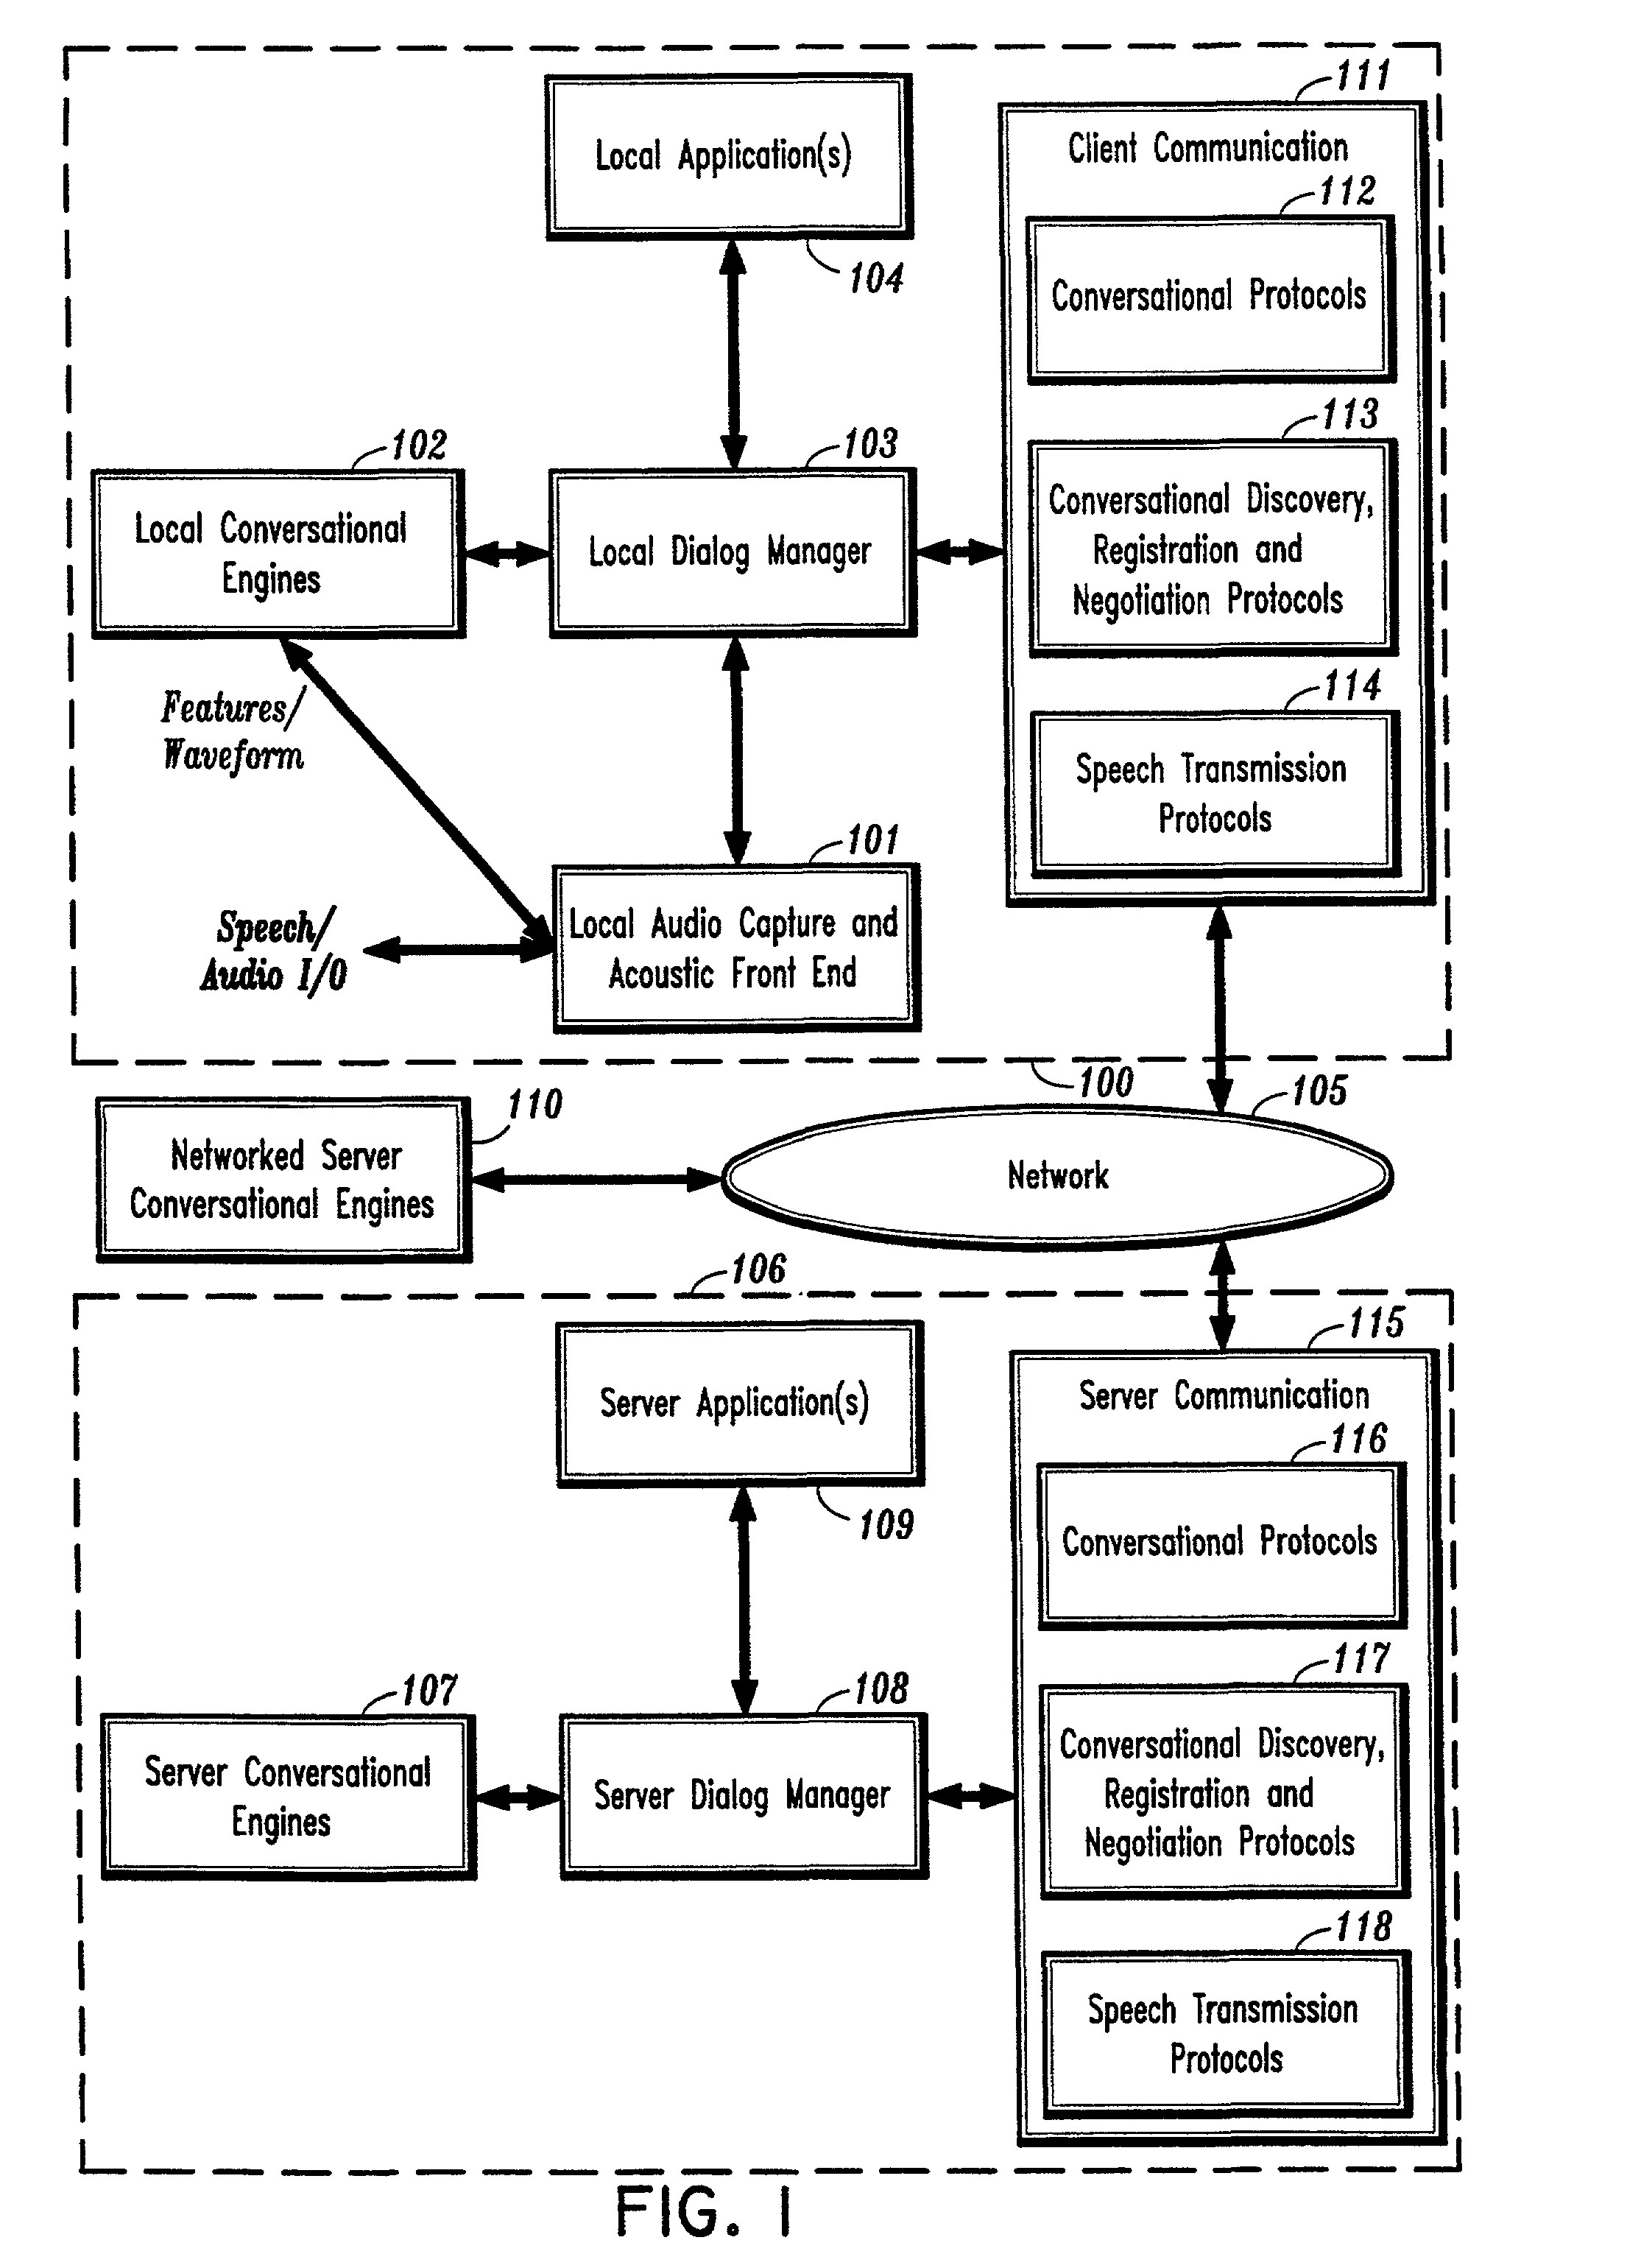 System and method for providing network coordinated conversational services